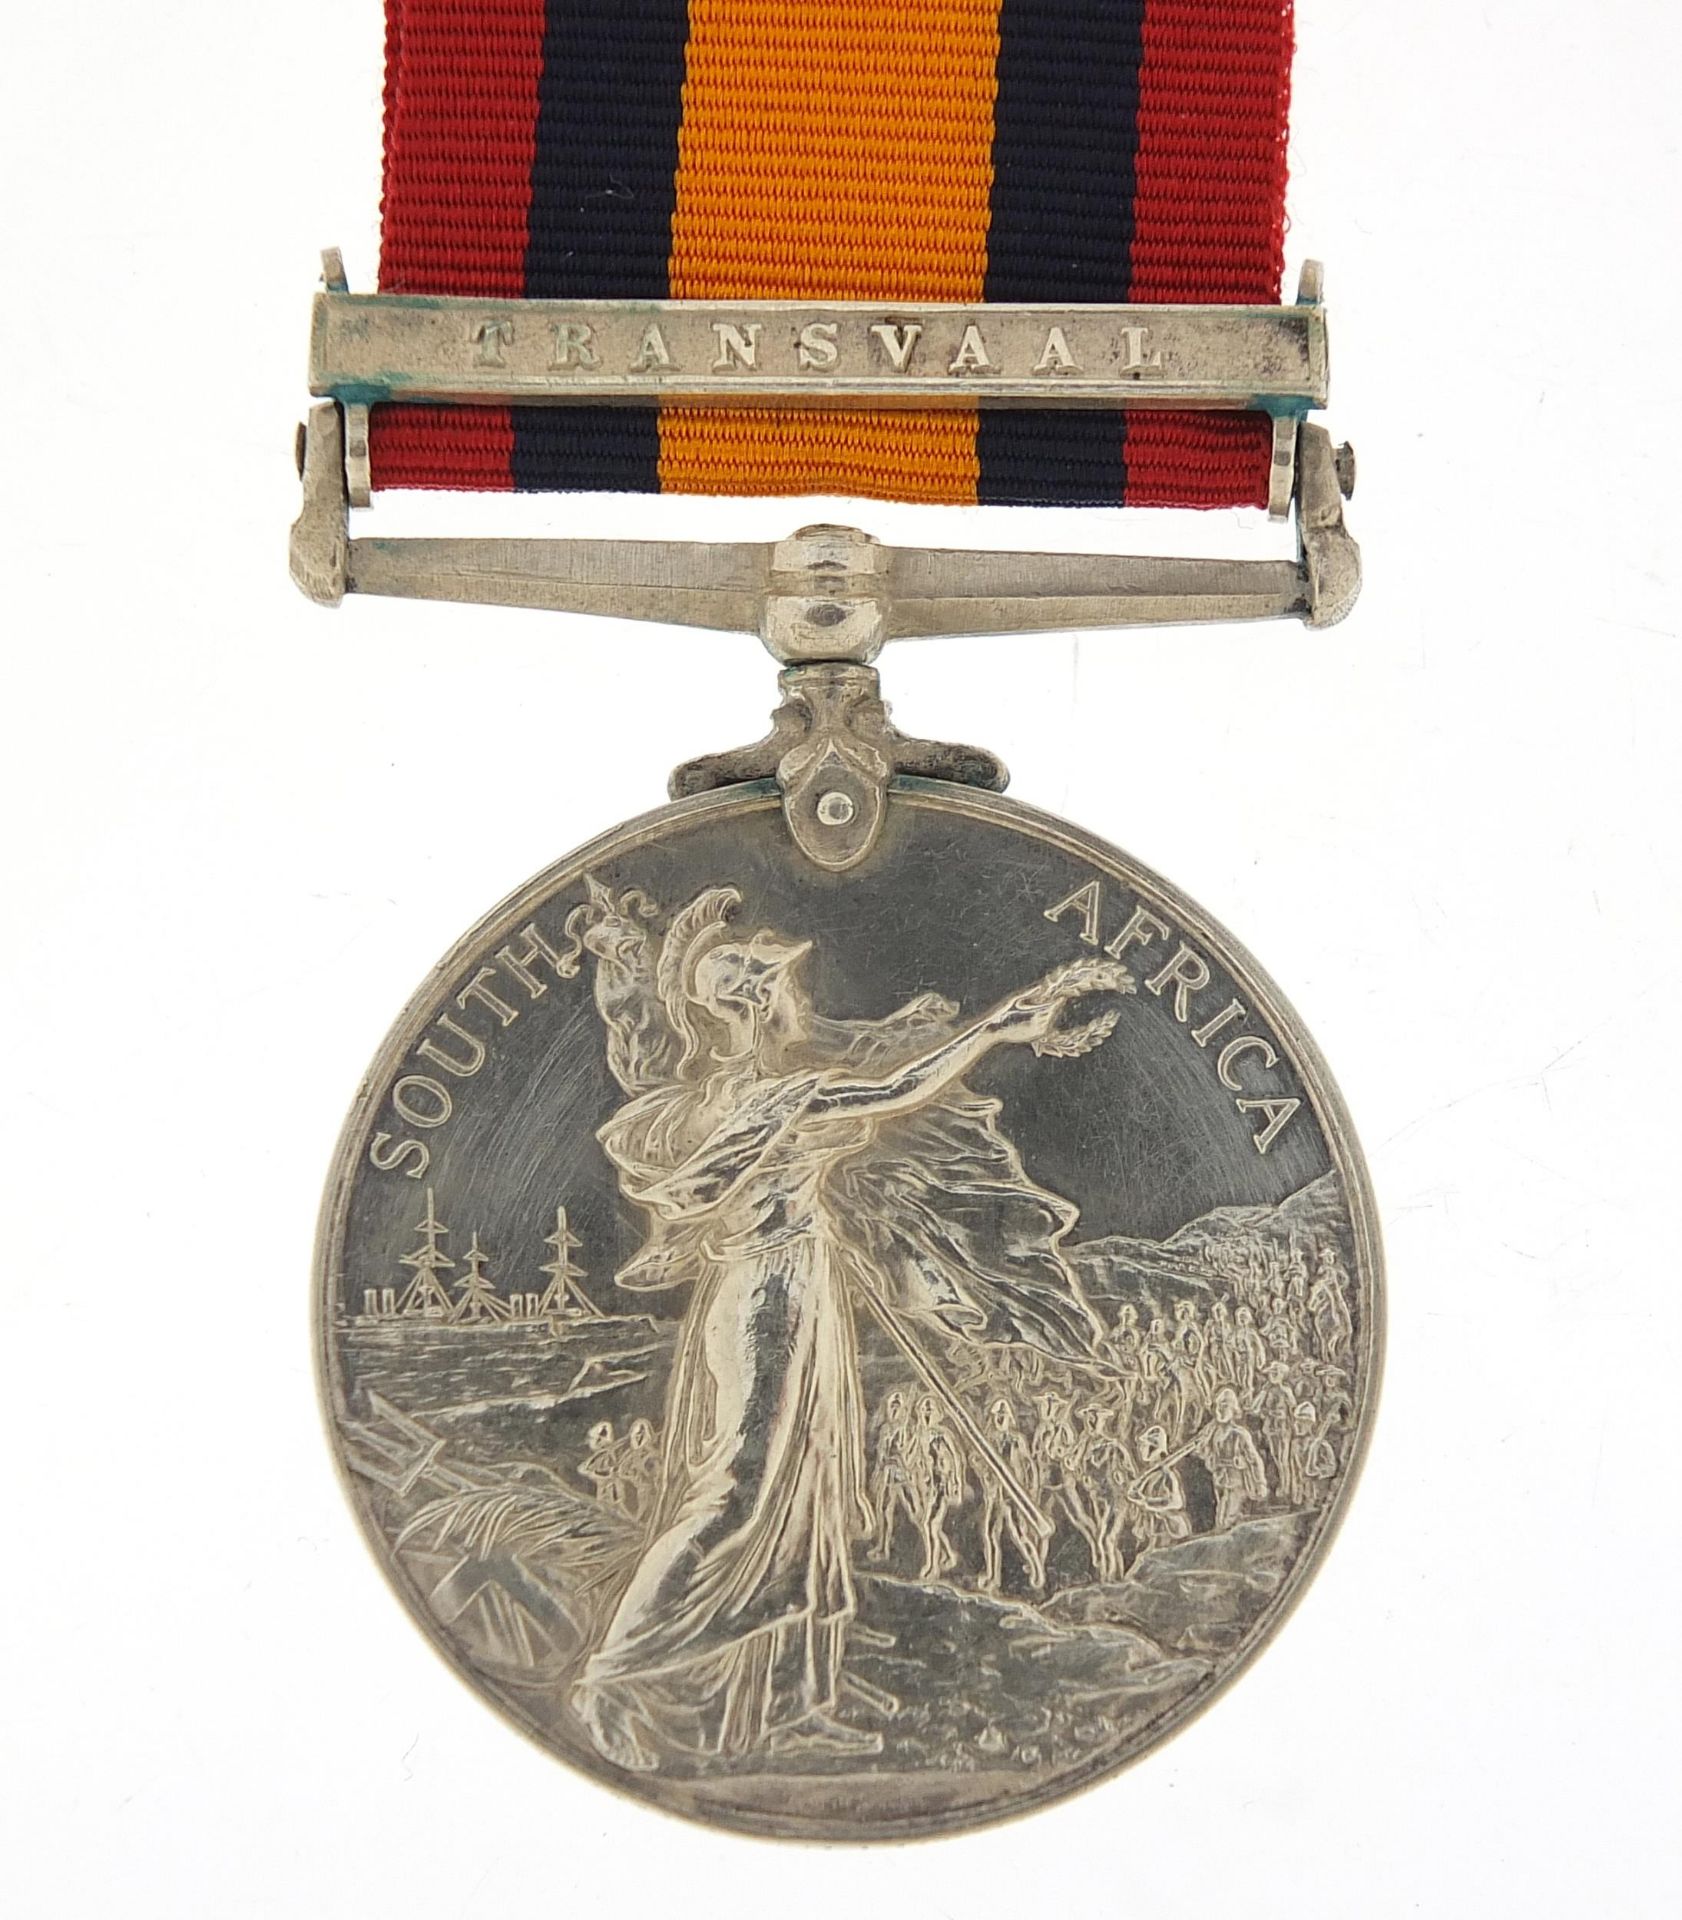 Victorian British military Queen's South Africa medal with Transvaal bar awarded to 2242TPR:J.